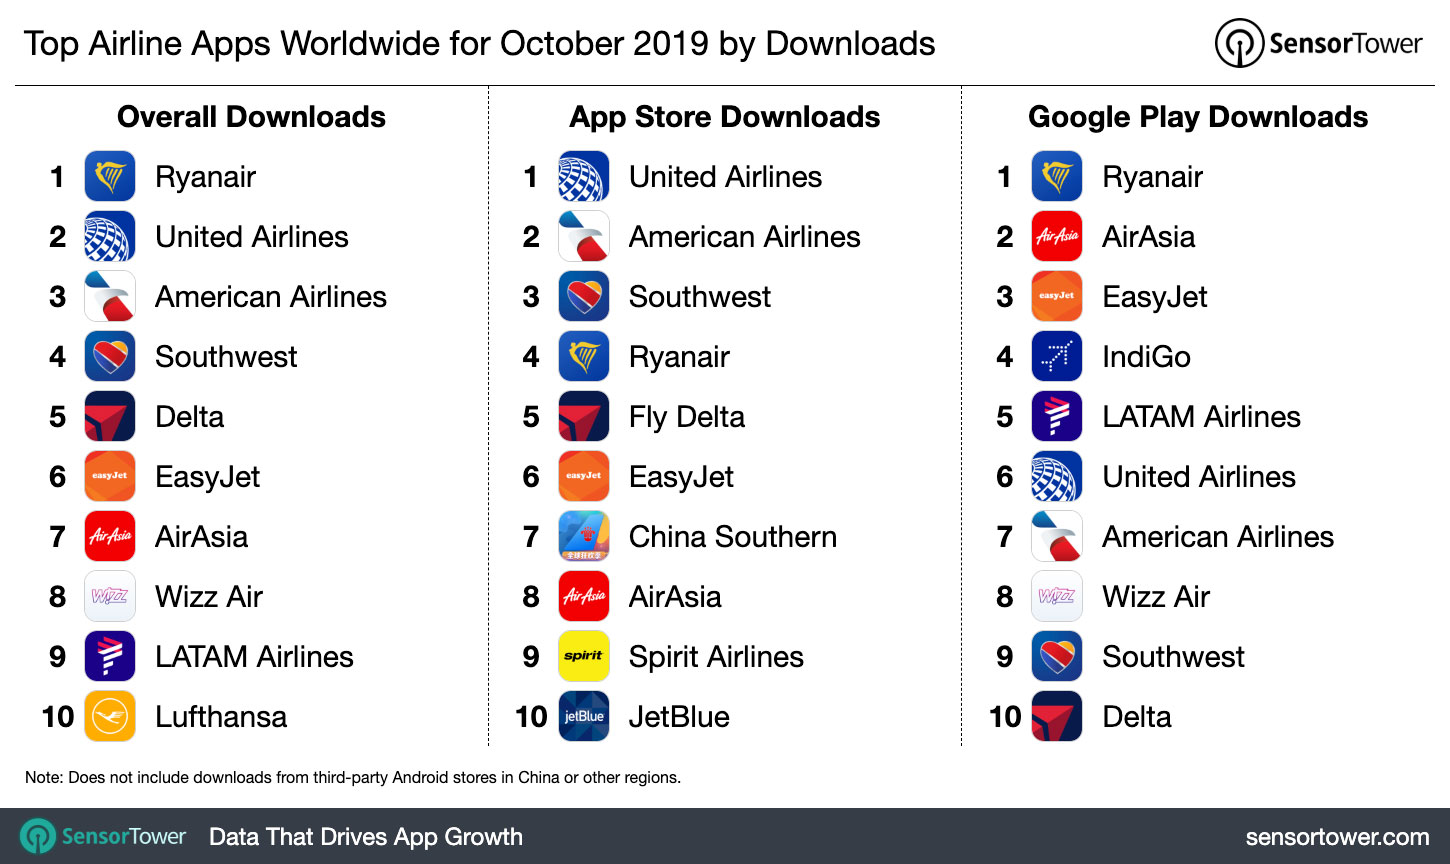 Top Airline Apps Worldwide for October 2019 by Downloads